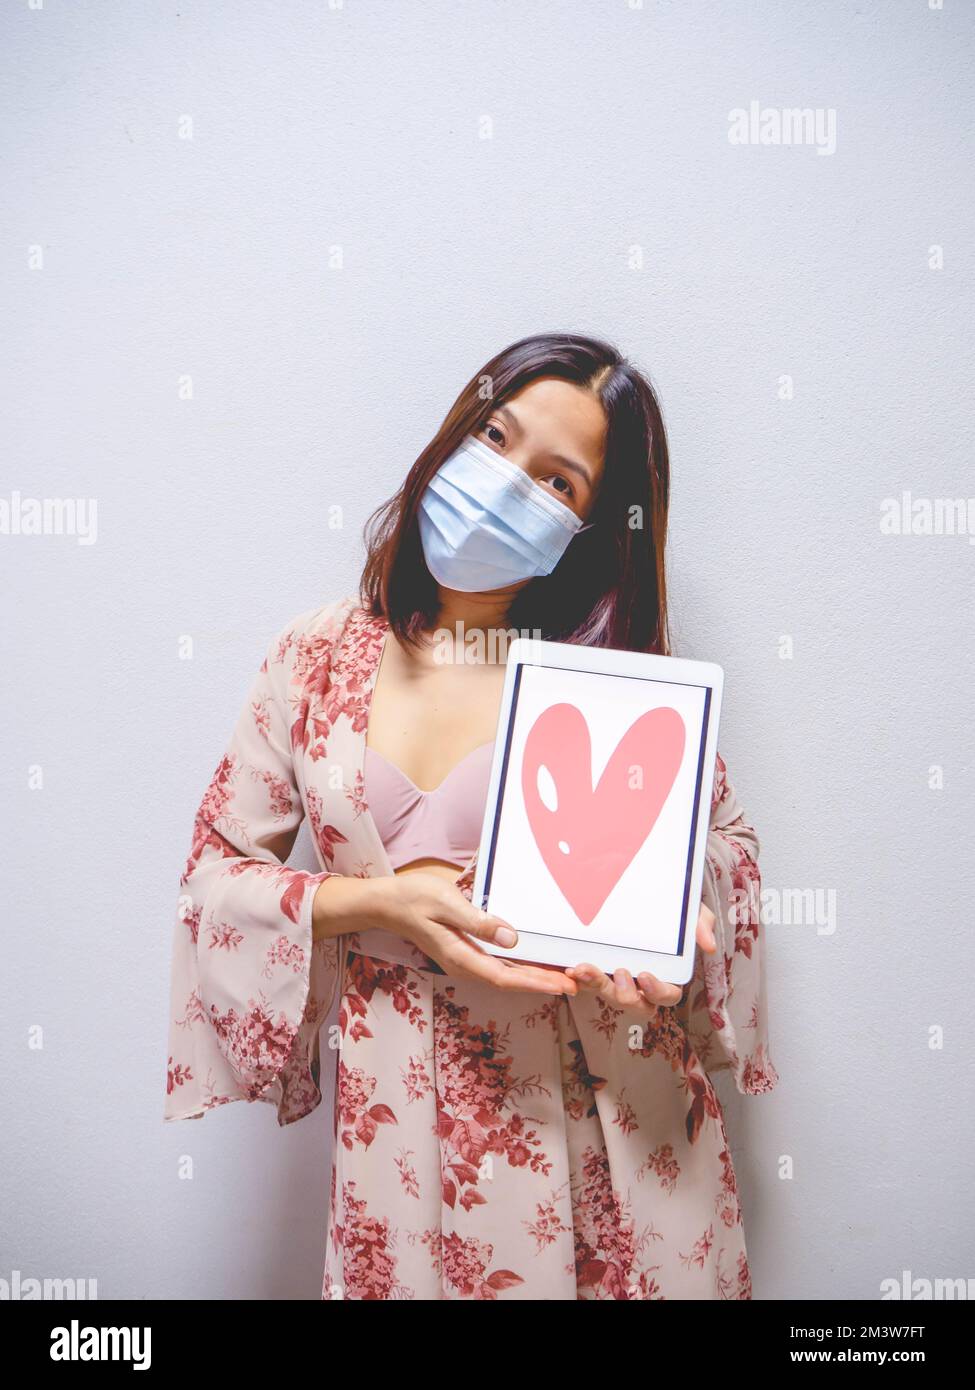 A woman wearing a mask and holding a heart shaped tablet. Stock Photo